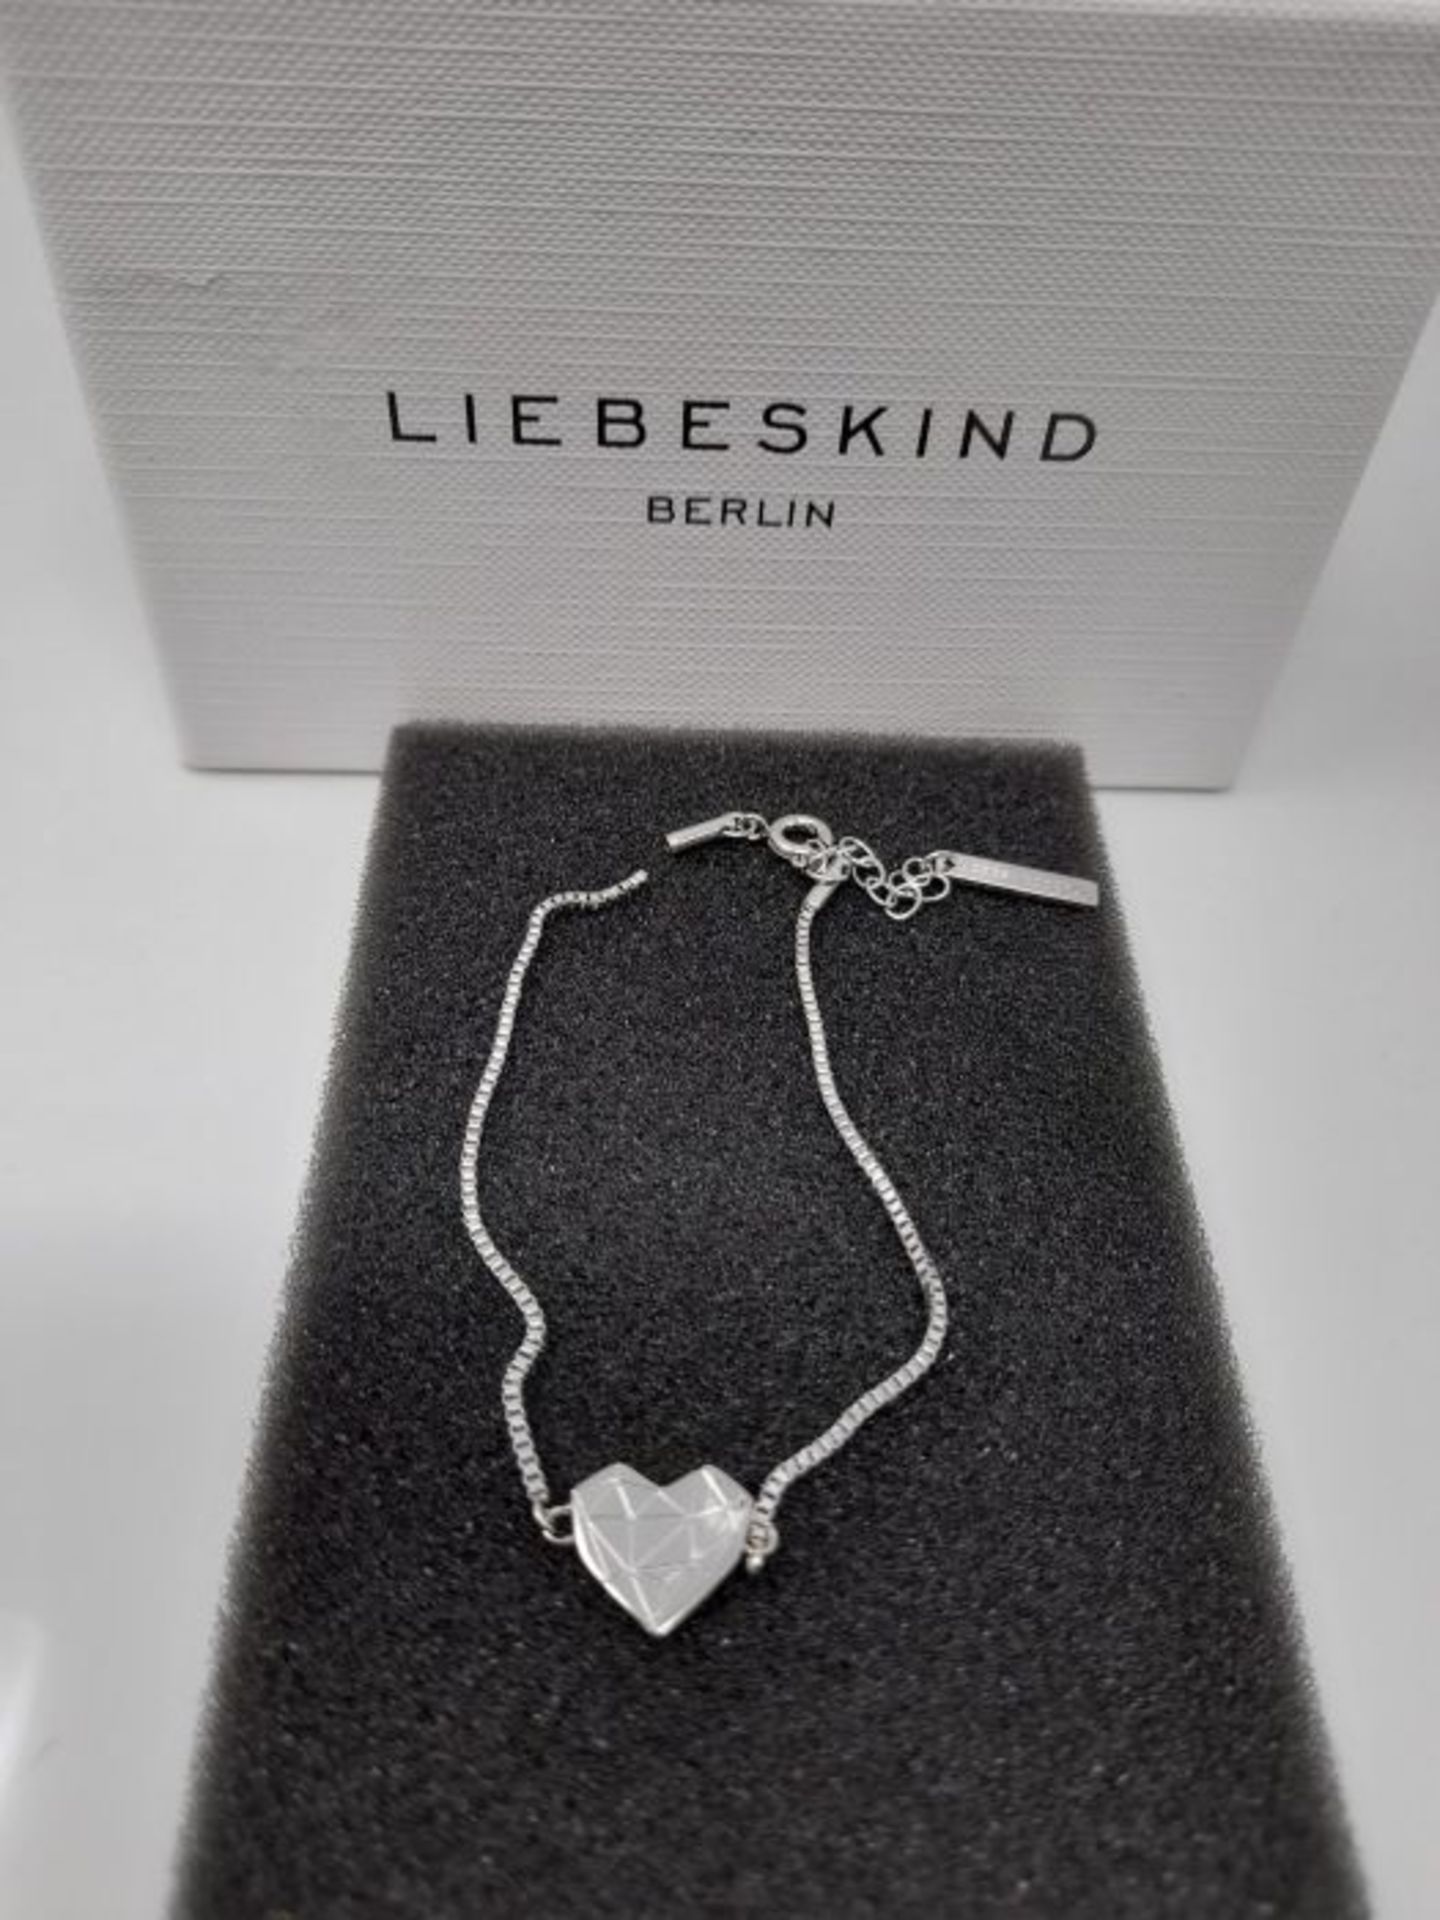 [CRACKED] Liebeskind Women's Bracelet Heart Stainless Steel Silver 20 cm, 20 cm, Stain - Image 3 of 3